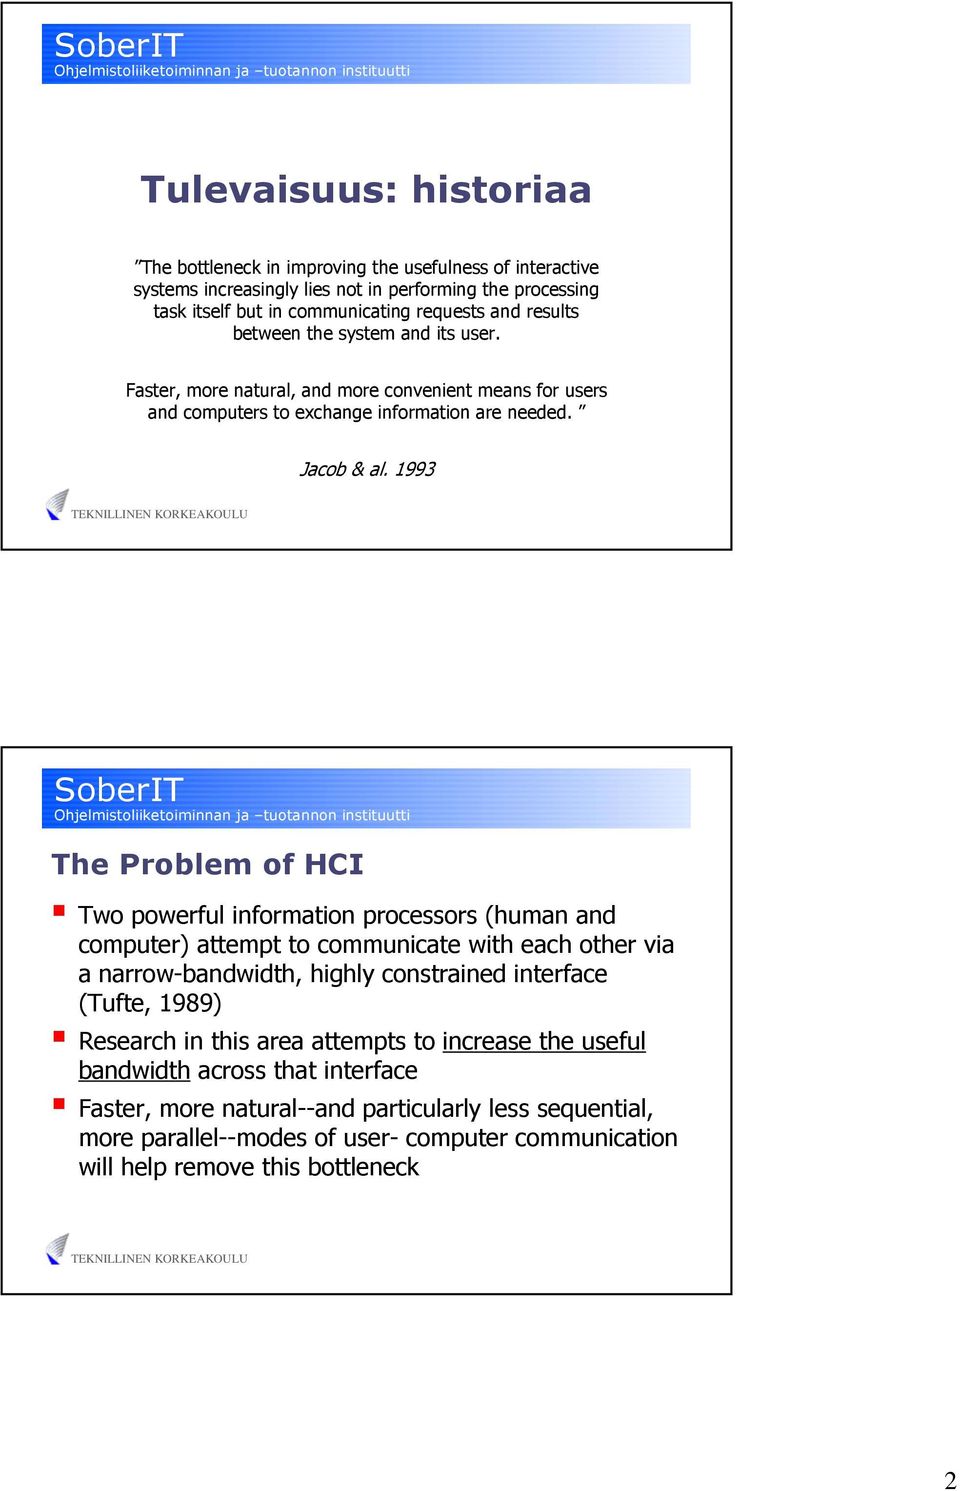 1993 The Problem of HCI Two powerful information processors (human and computer) attempt to communicate with each other via a narrow-bandwidth, highly constrained interface (Tufte, 1989)